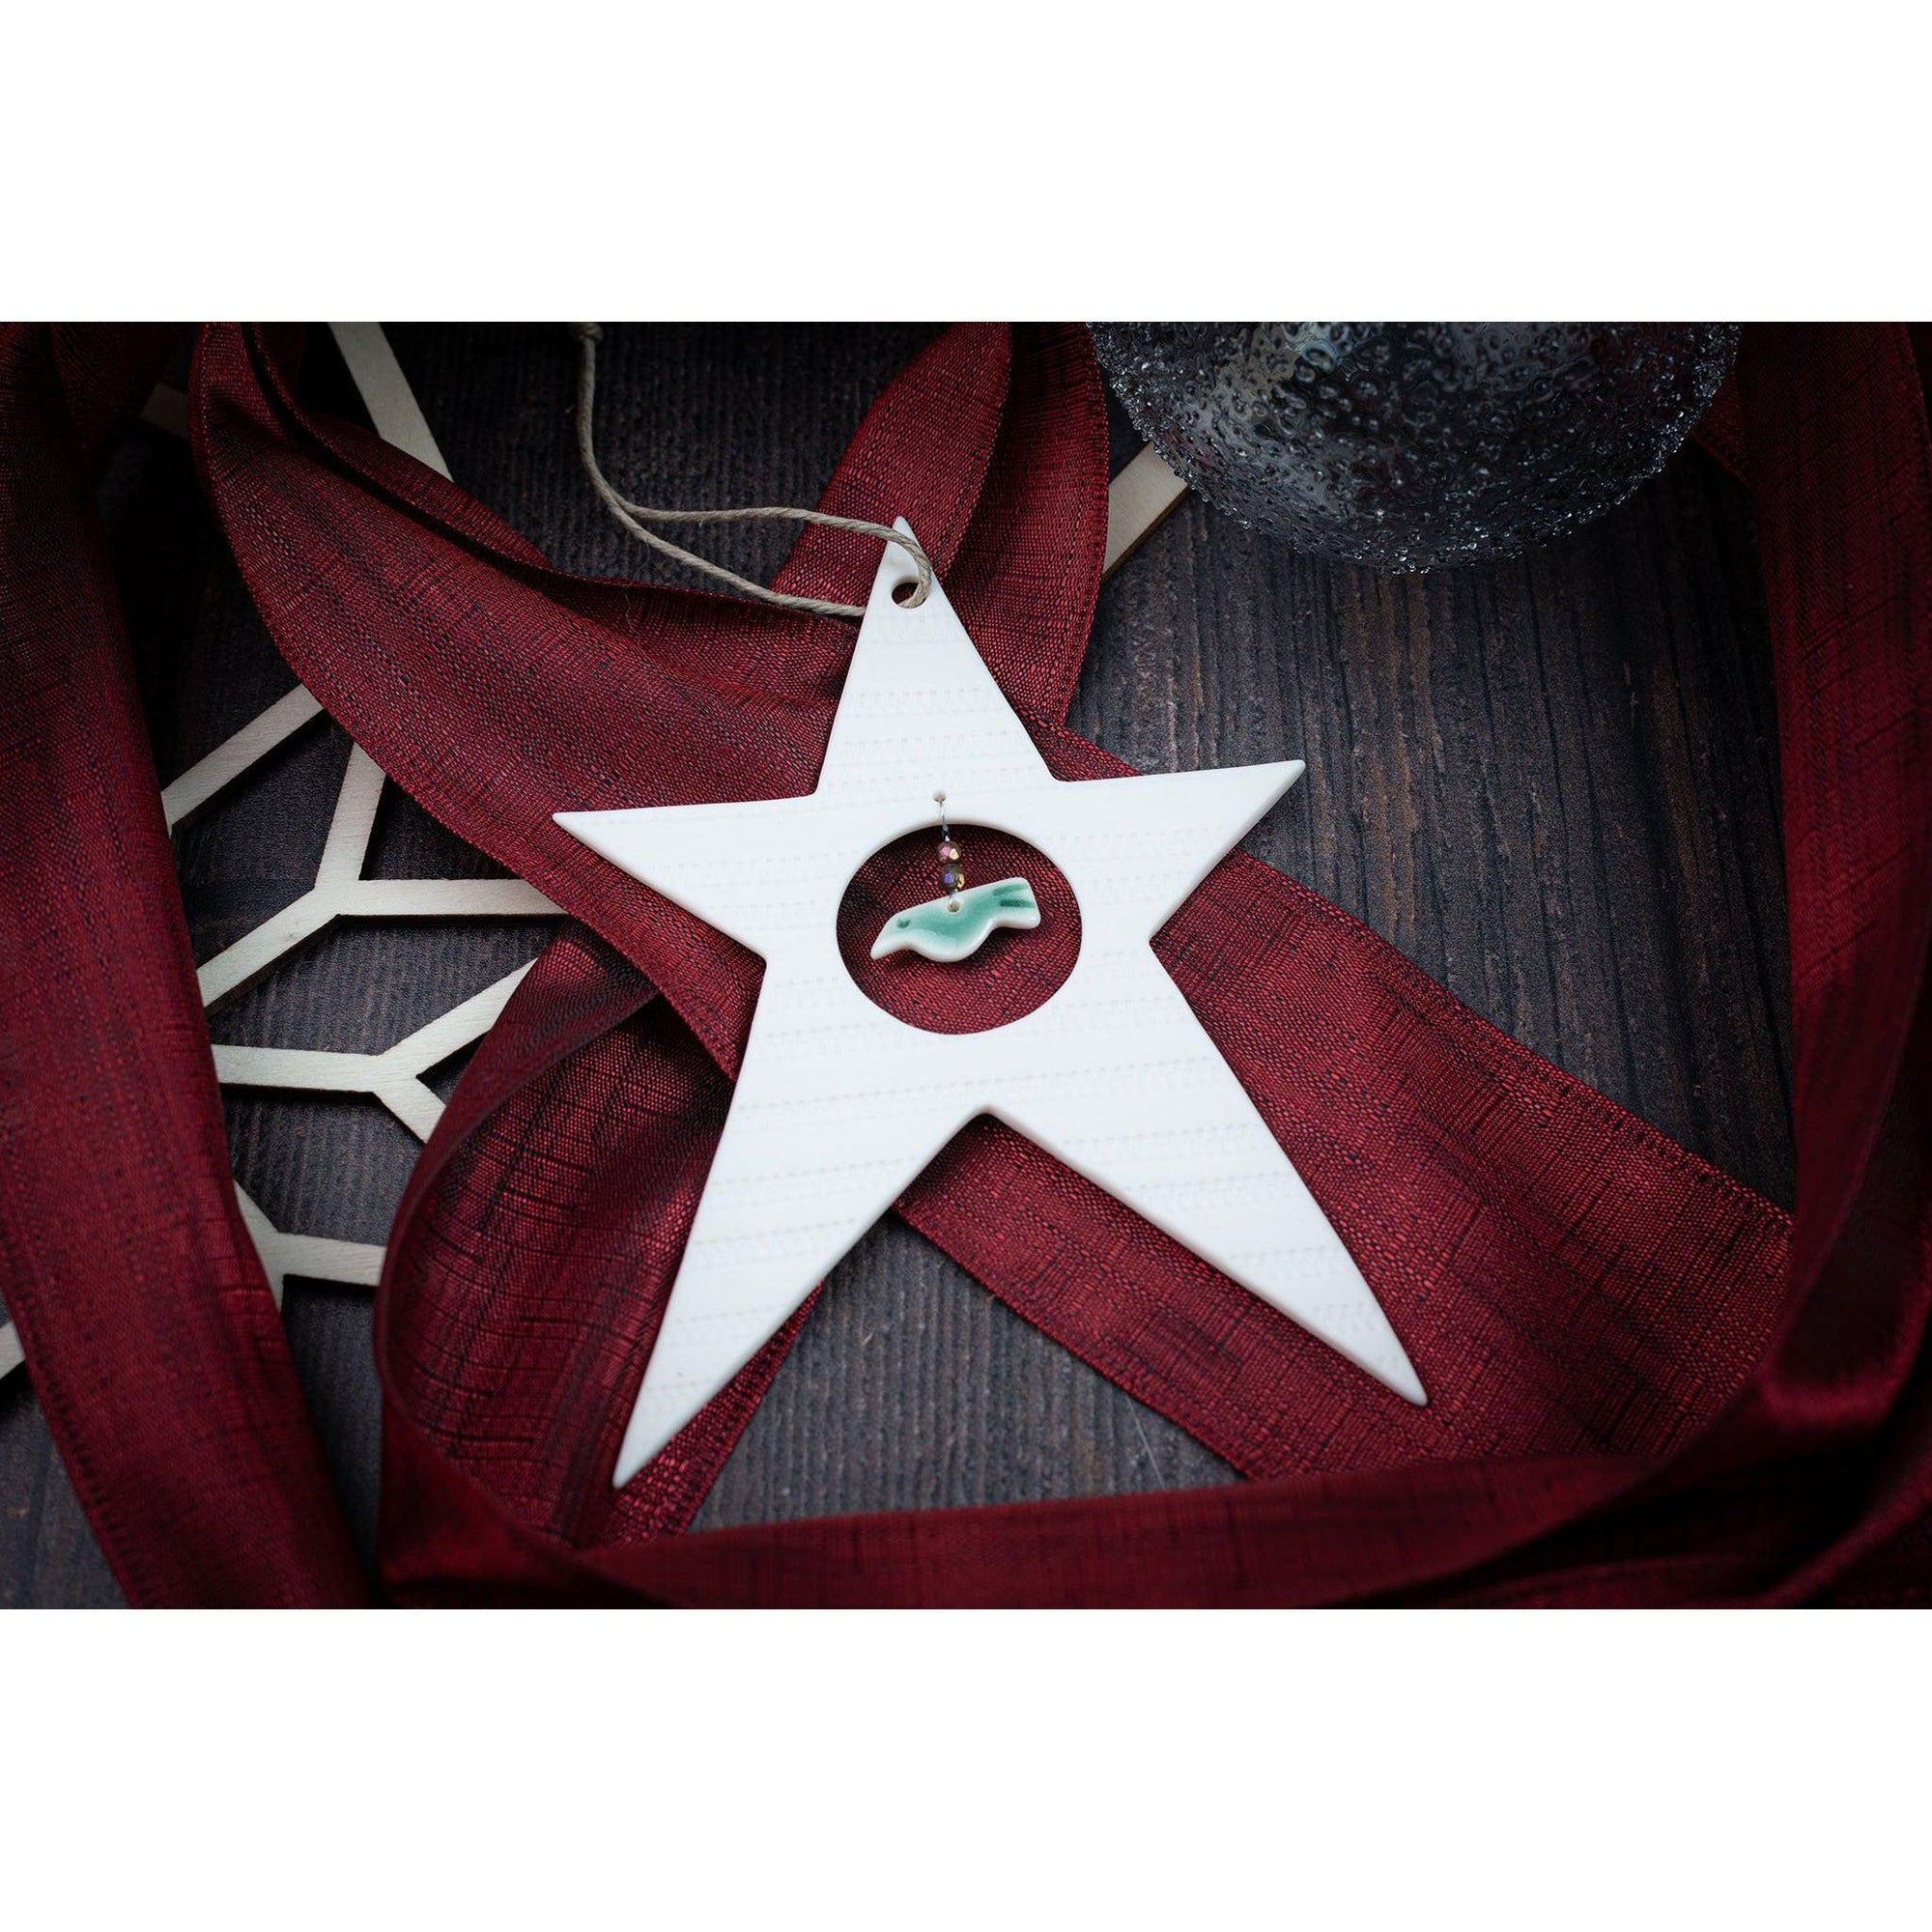 Porcelain Star Decoration by Rhian Winslade, available at Padstow Gallery, Cornwall